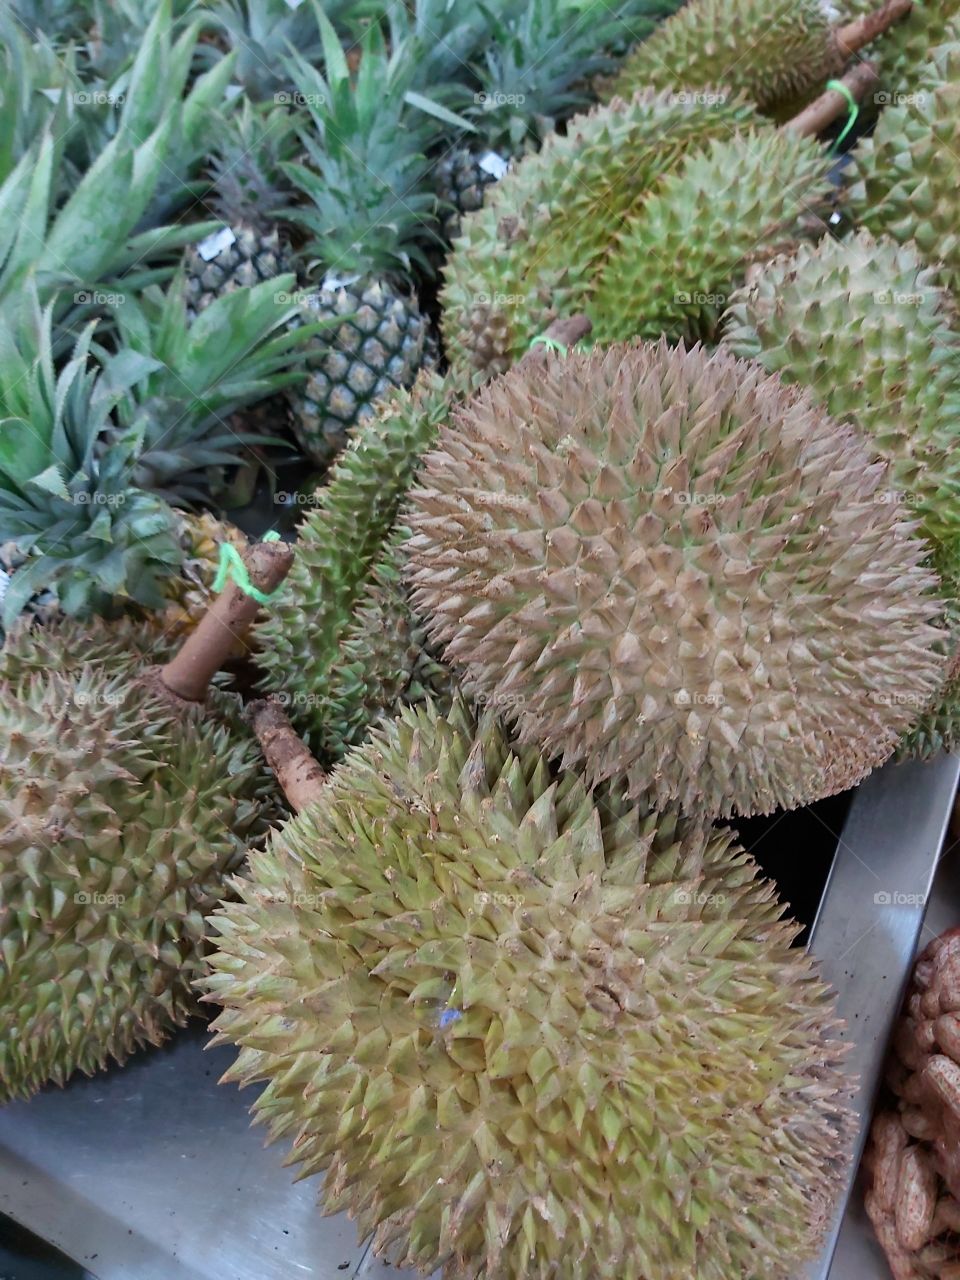 This fruit is called Durian in Philipines.
They said it smells like hell but taste like heaven.